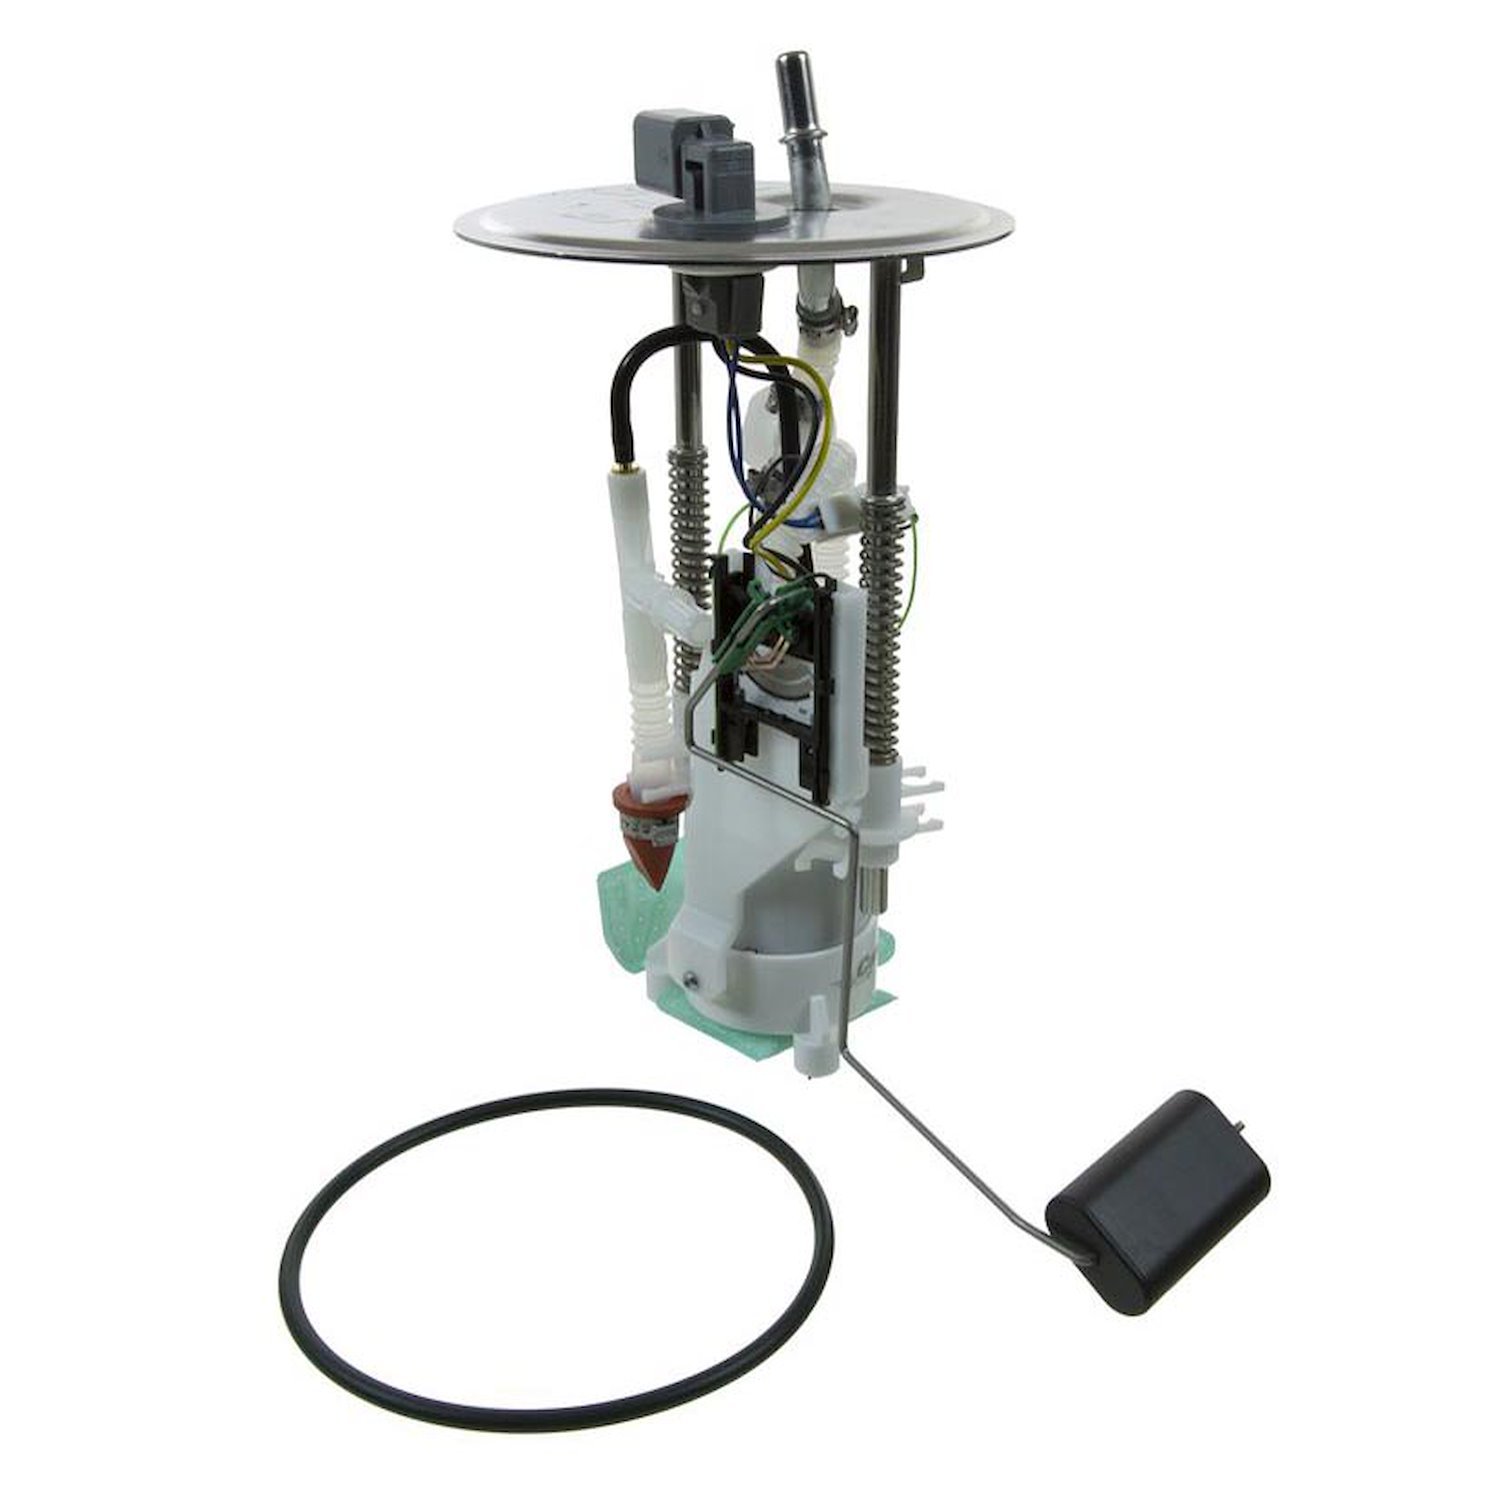 OE Ford Replacement Fuel Pump Module Assembly for